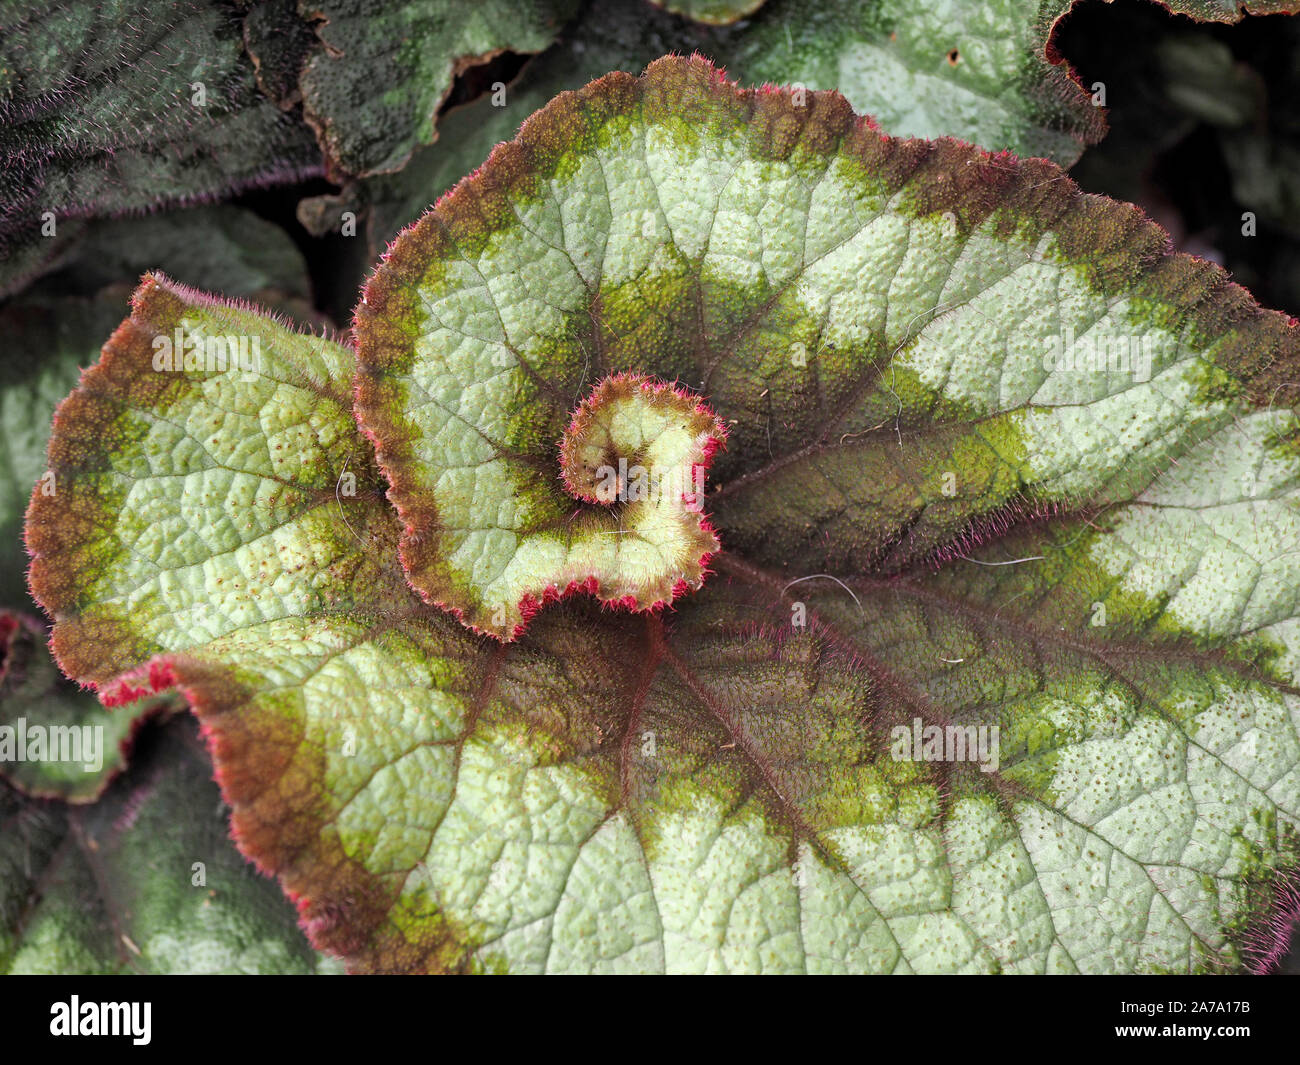 Begonia Rex - painted-leaf begonias or fancy-leaf begonias - with interesting coiled variegated leaf in green grey and reddish pink Stock Photo